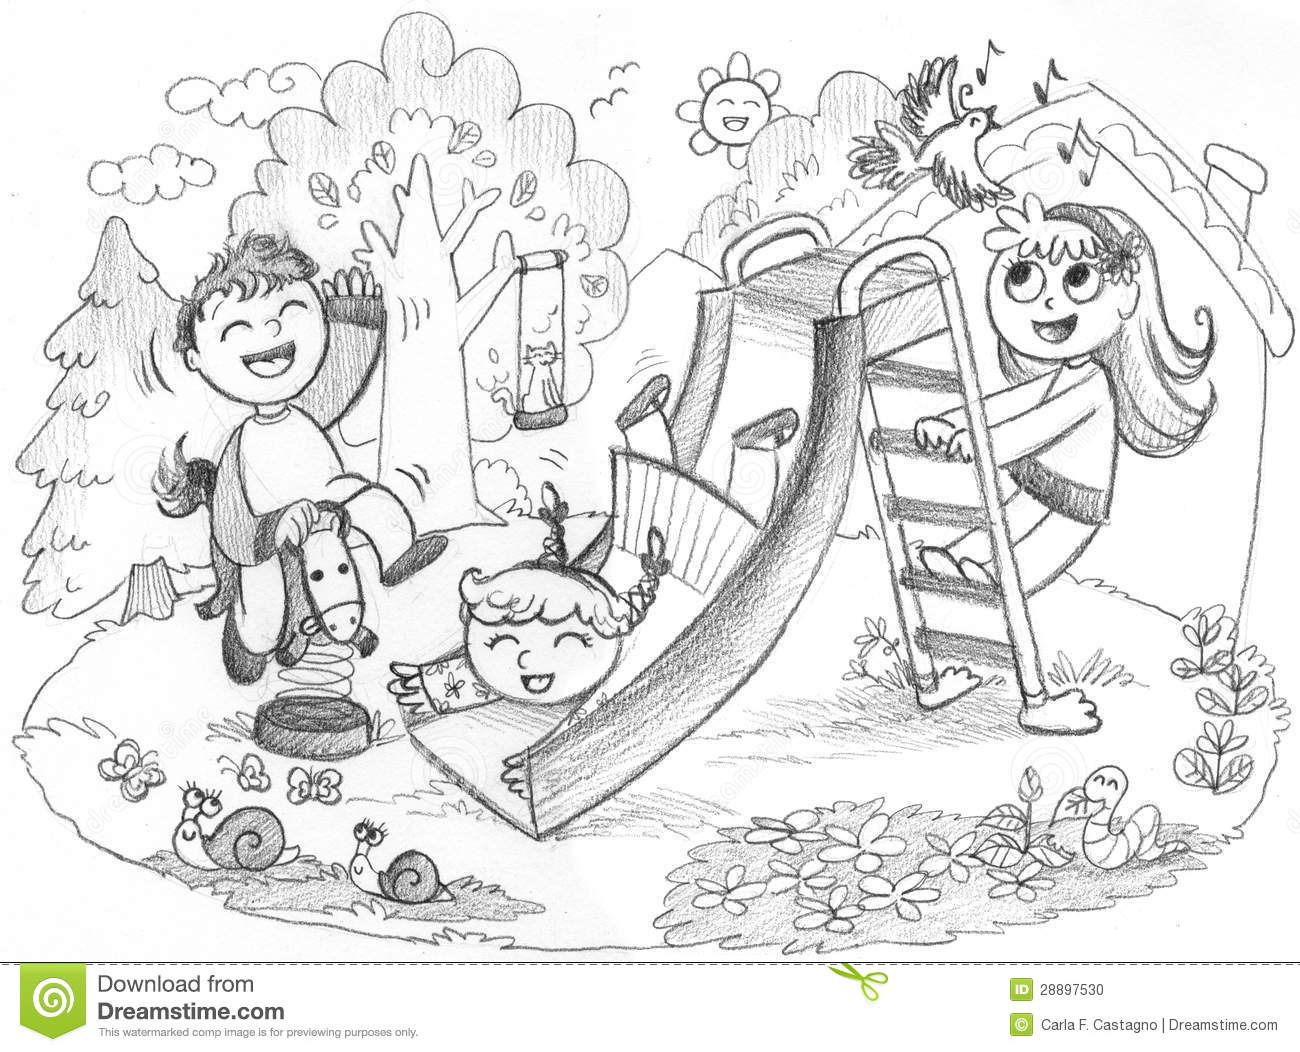 Happy Children Playing Together  Grey Pencil Hand Drawn Illustration